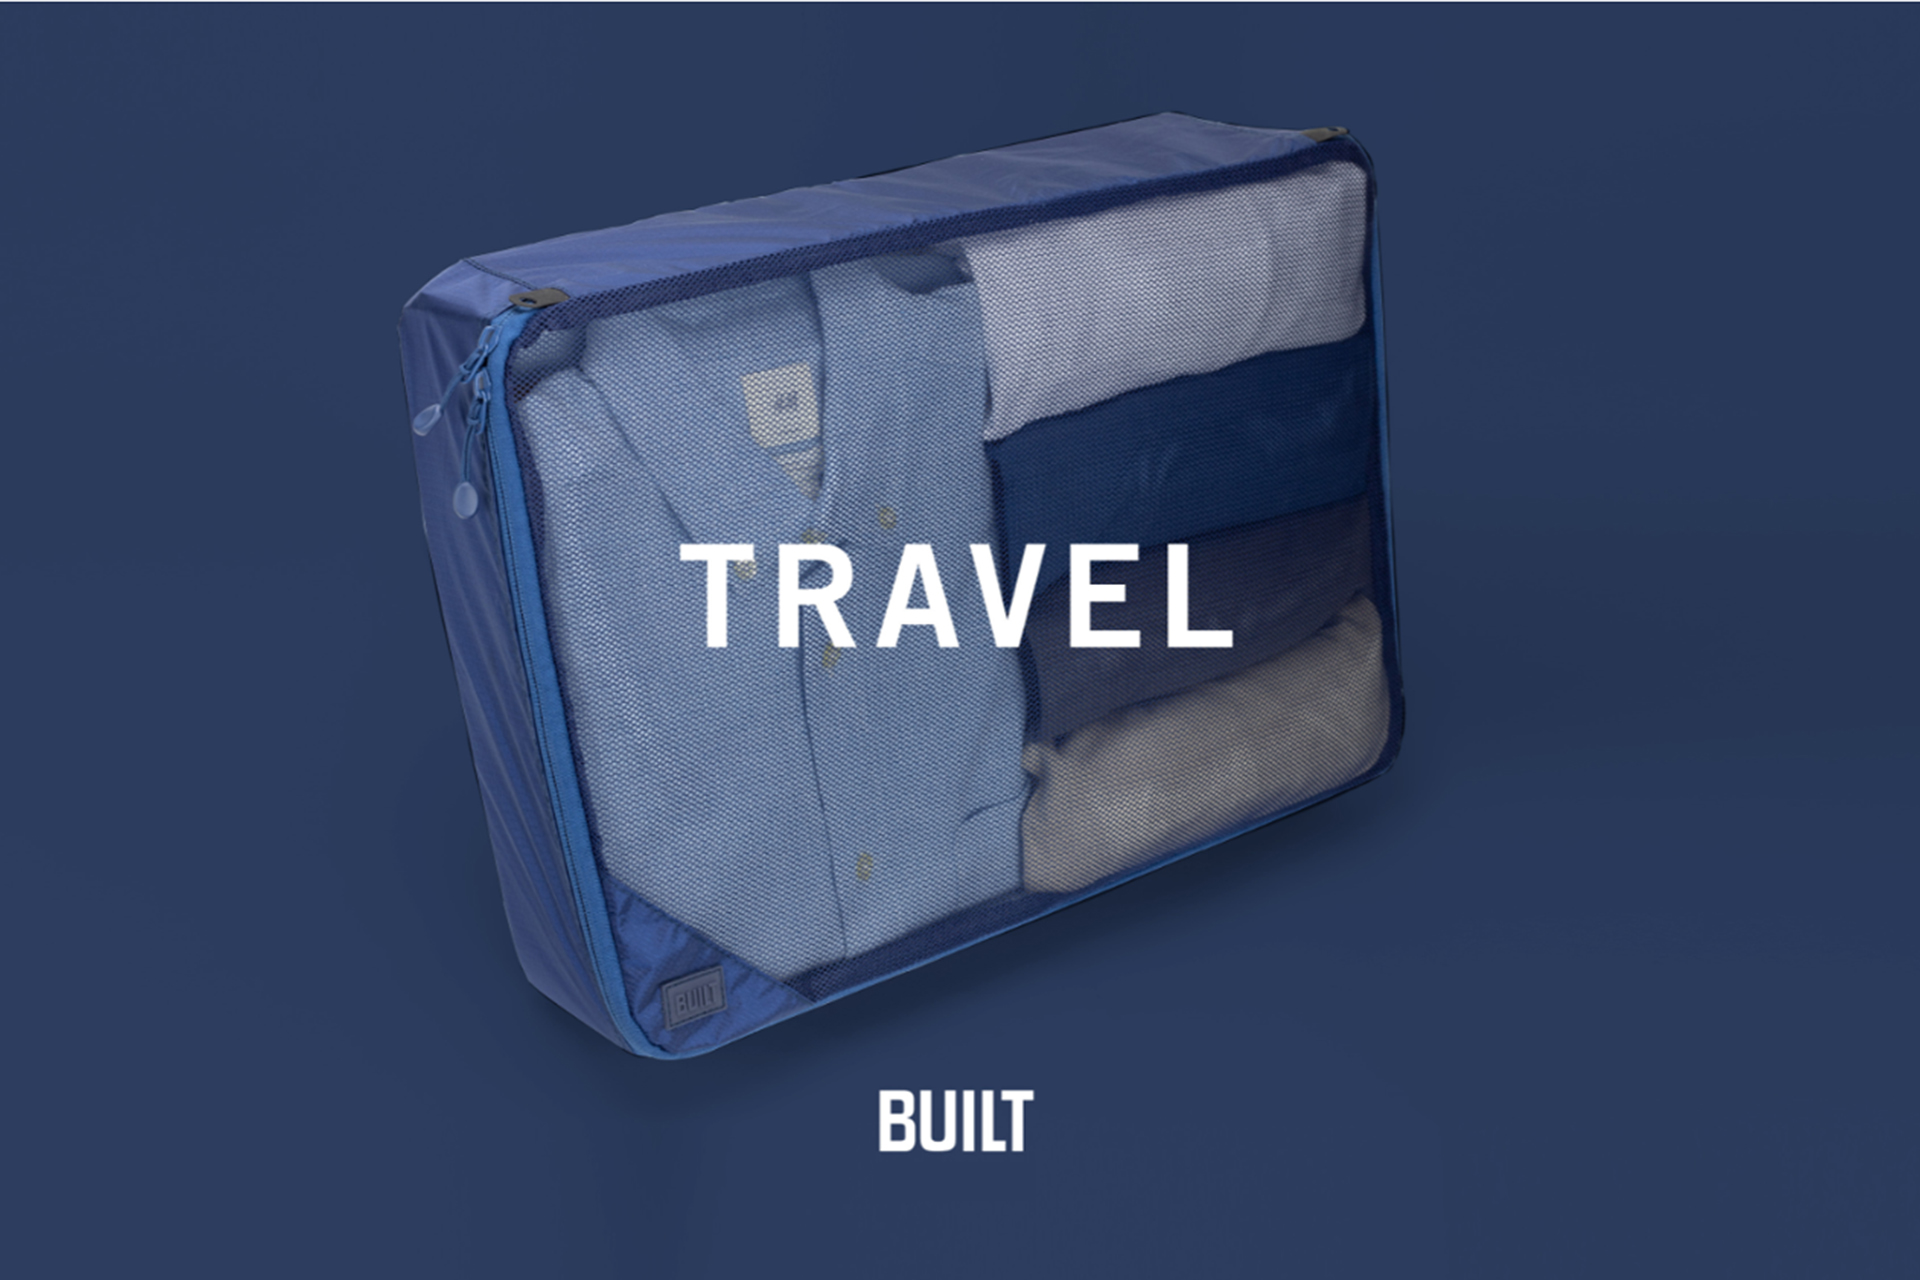 Built NY Introduces Line of Travel Organization Products